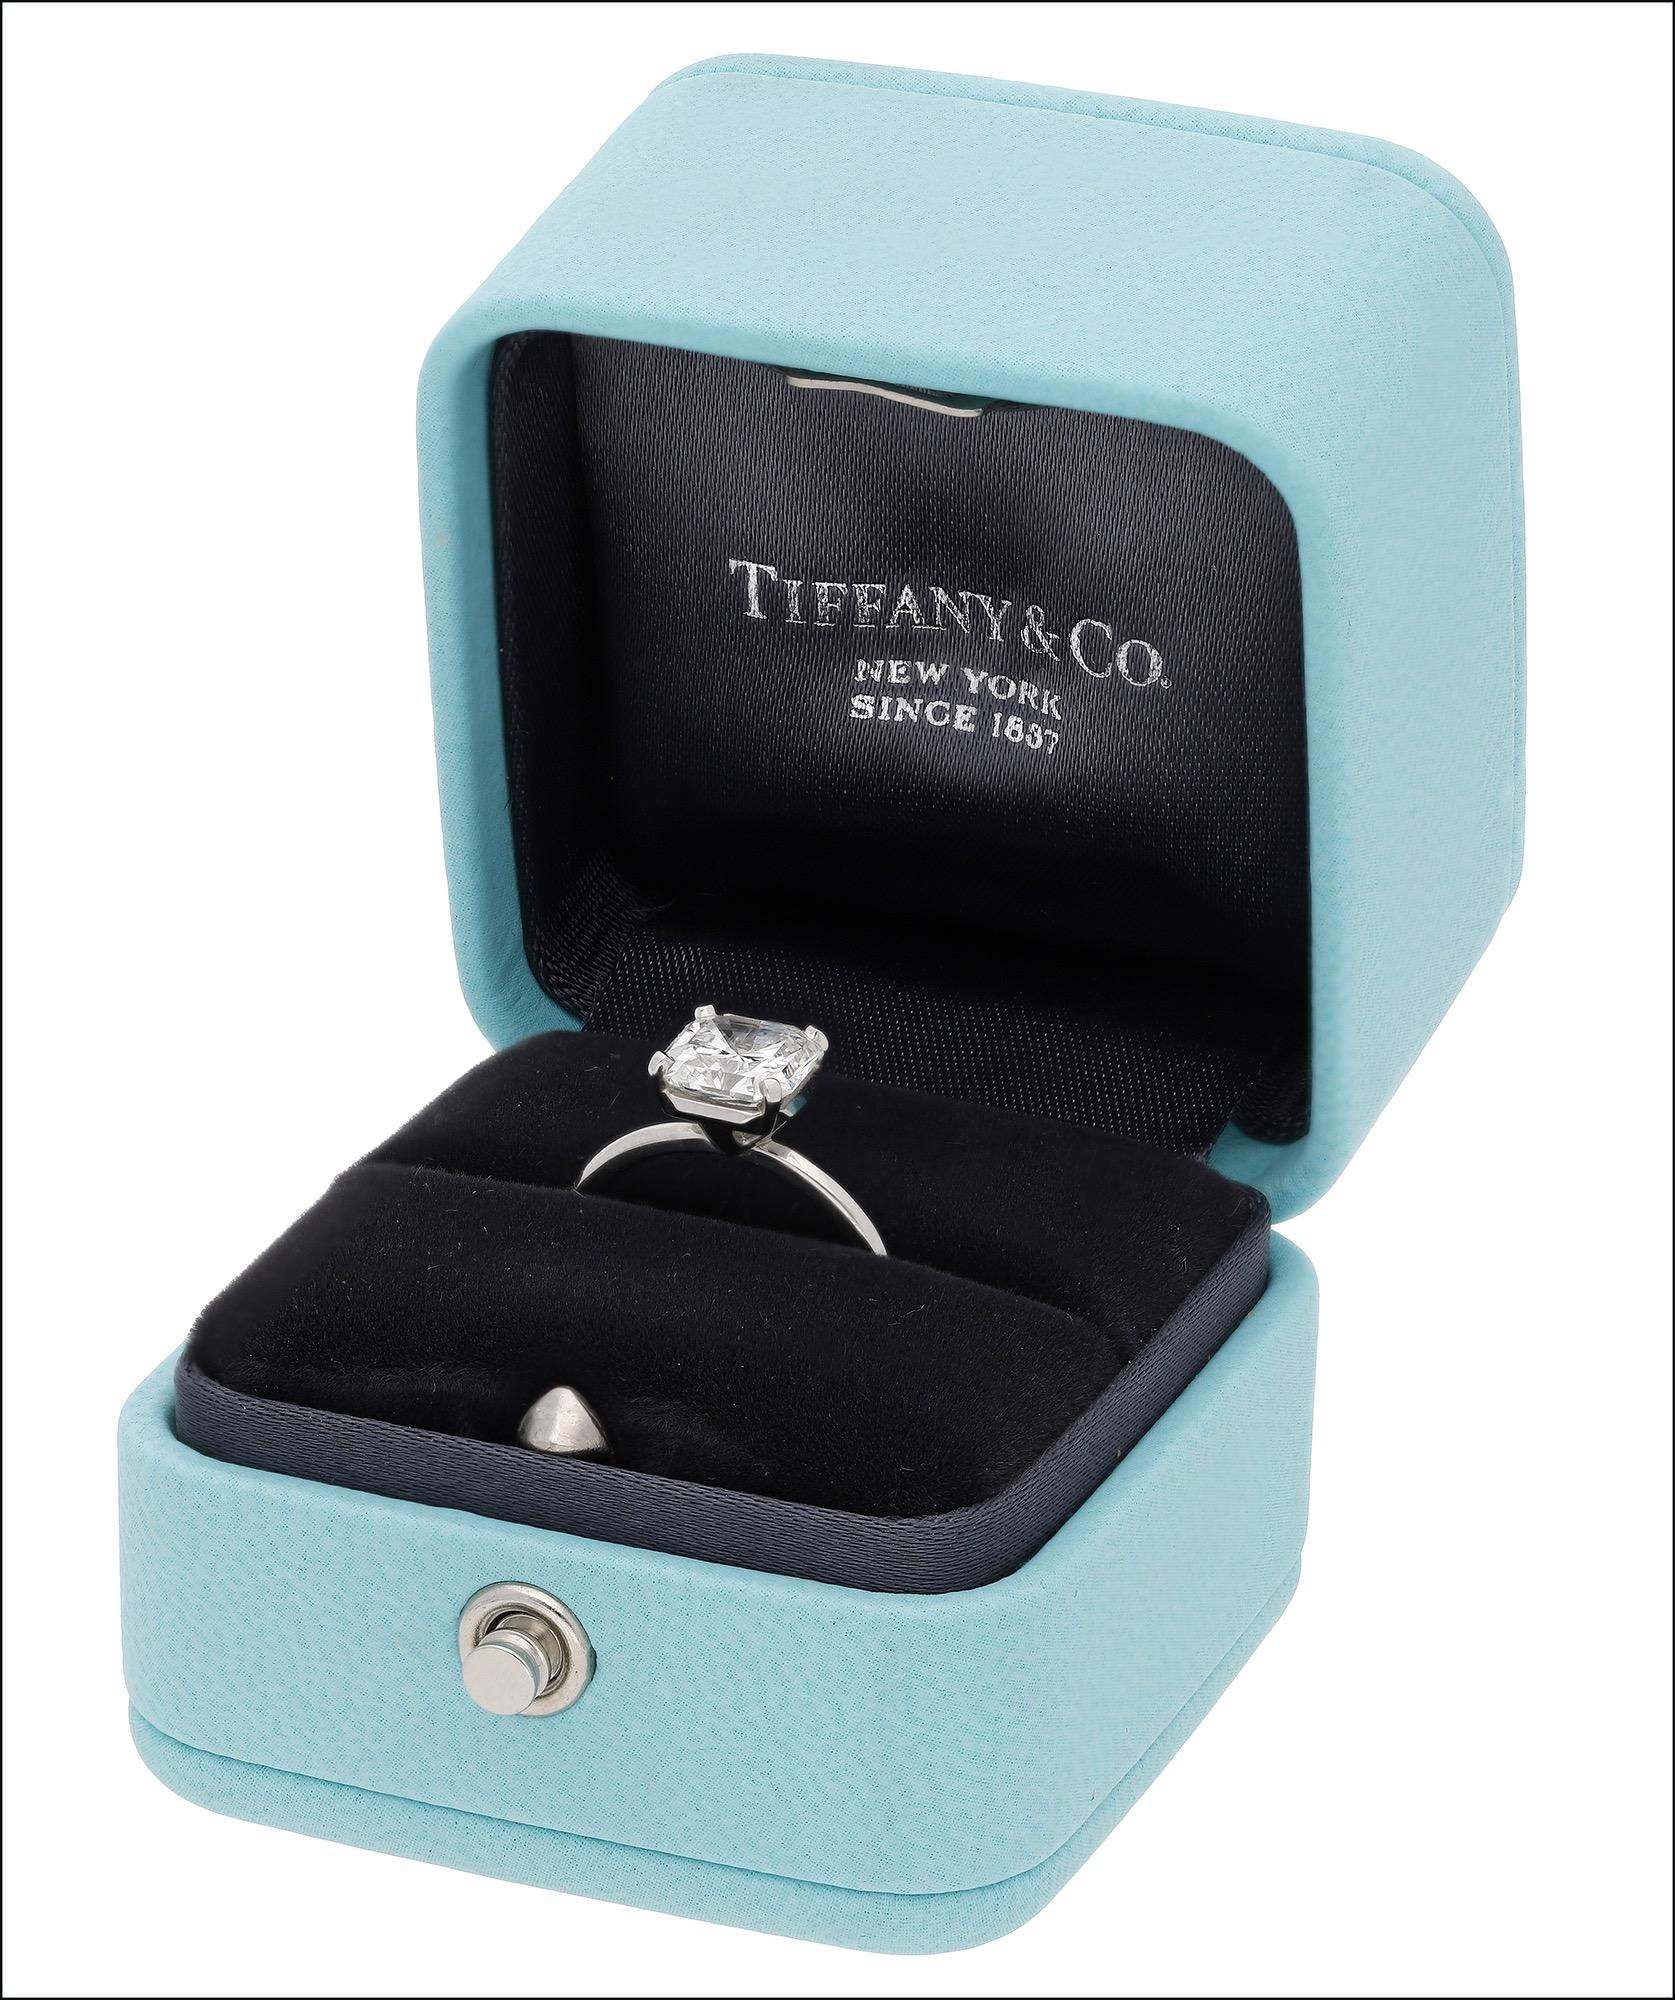 Royal House Antiques

Royal House Antiques is delighted to offer for sale this exceptionally rare, Tiffany True 1.61ct diamond and platinum engagement ring with original box, packaging and papers, with a current retail of just under £29,000